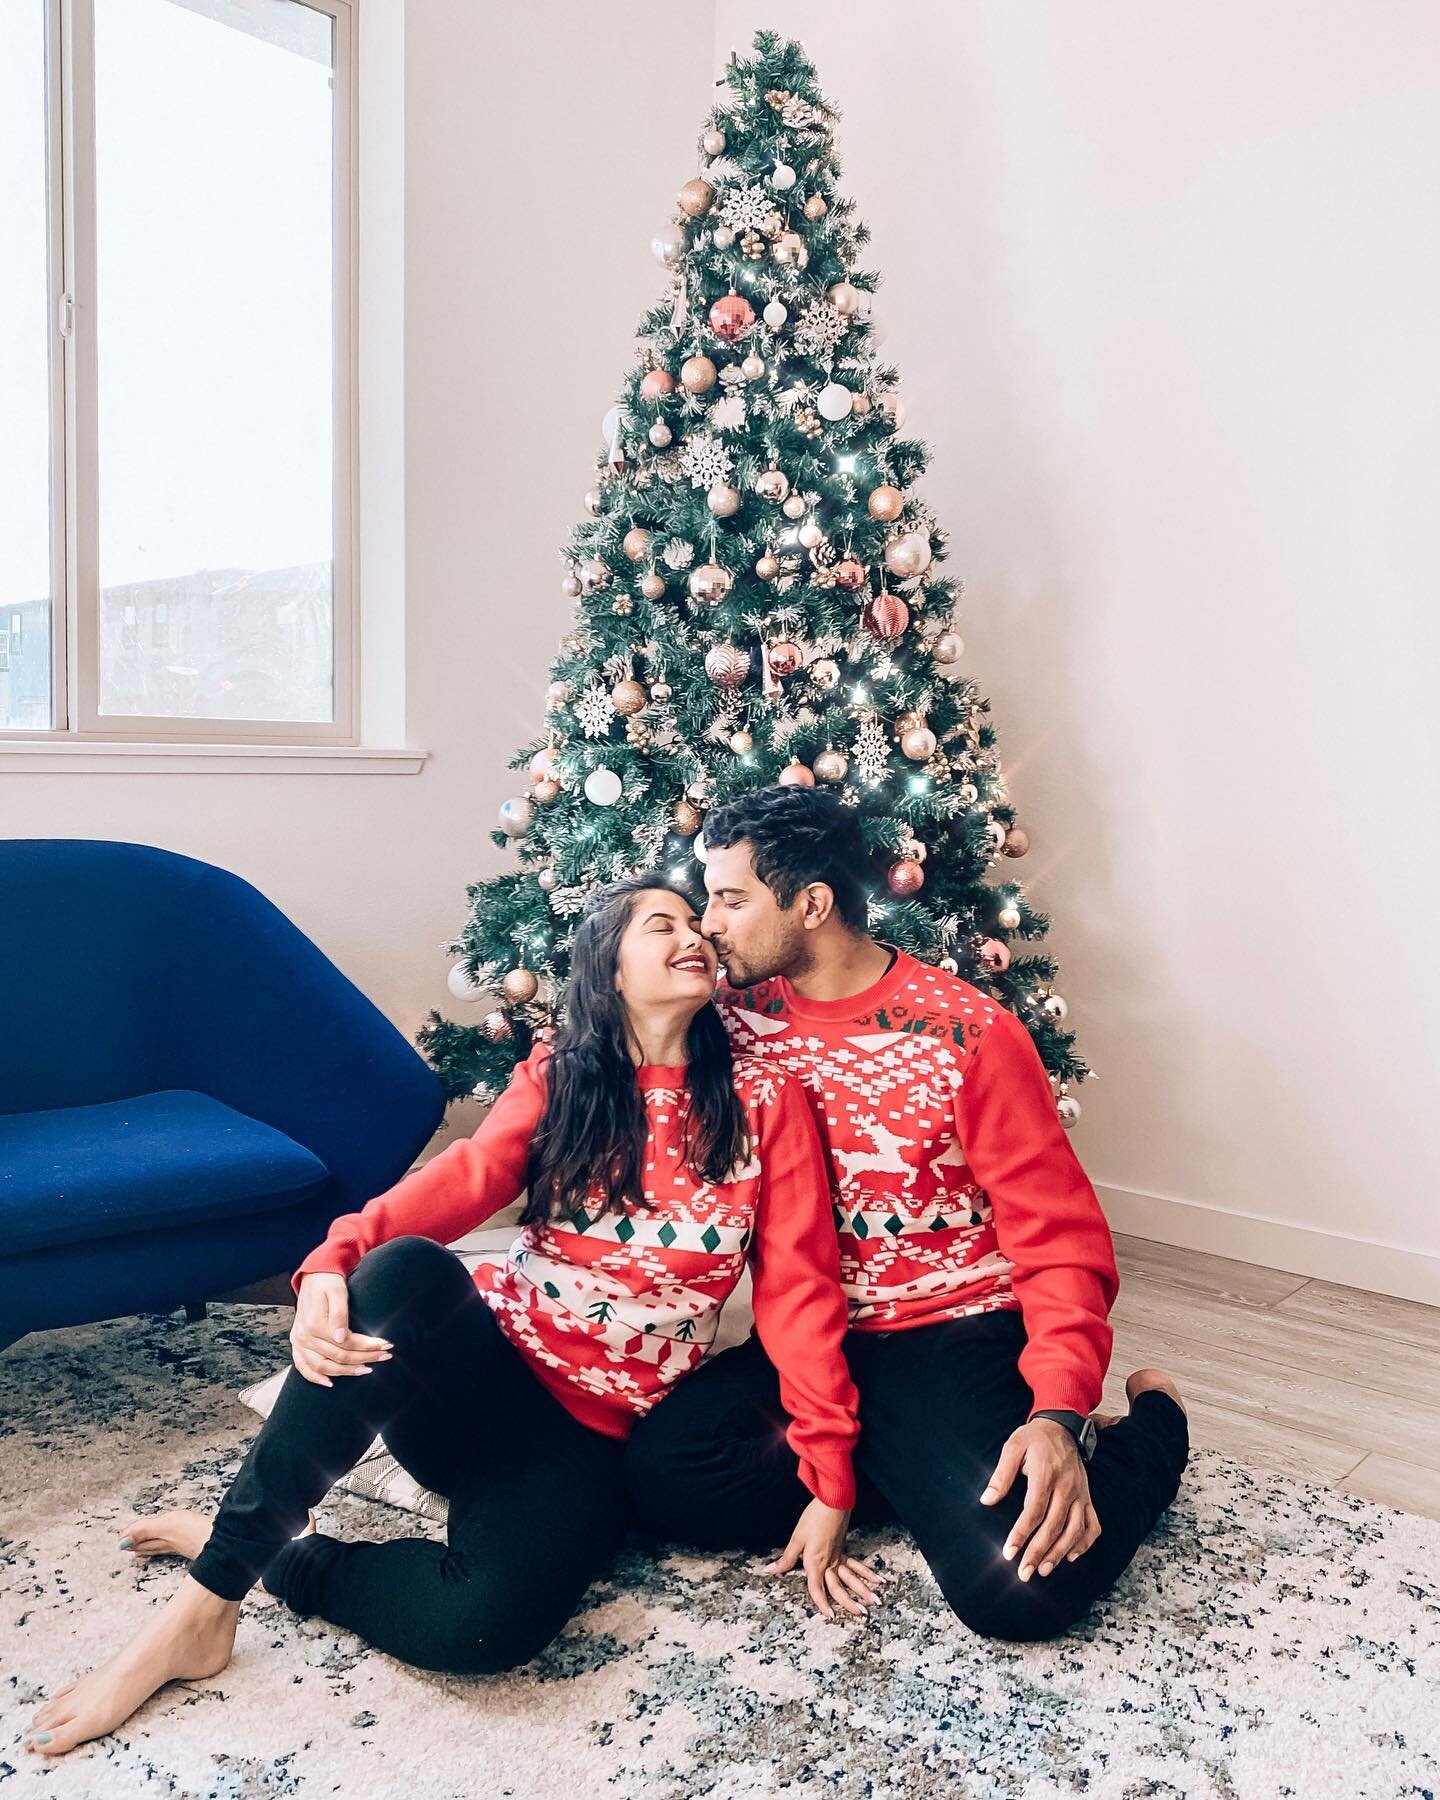 Merry X&rsquo;mas and happy holidays 🎄 🍾 
~ xo, Nupur &amp; Kaushik
...
I know this year has been tough on many and most of us haven&rsquo;t seen our family, parents, friends in forever. 

This is the first time in 5 years that Kaushik and I aren&r